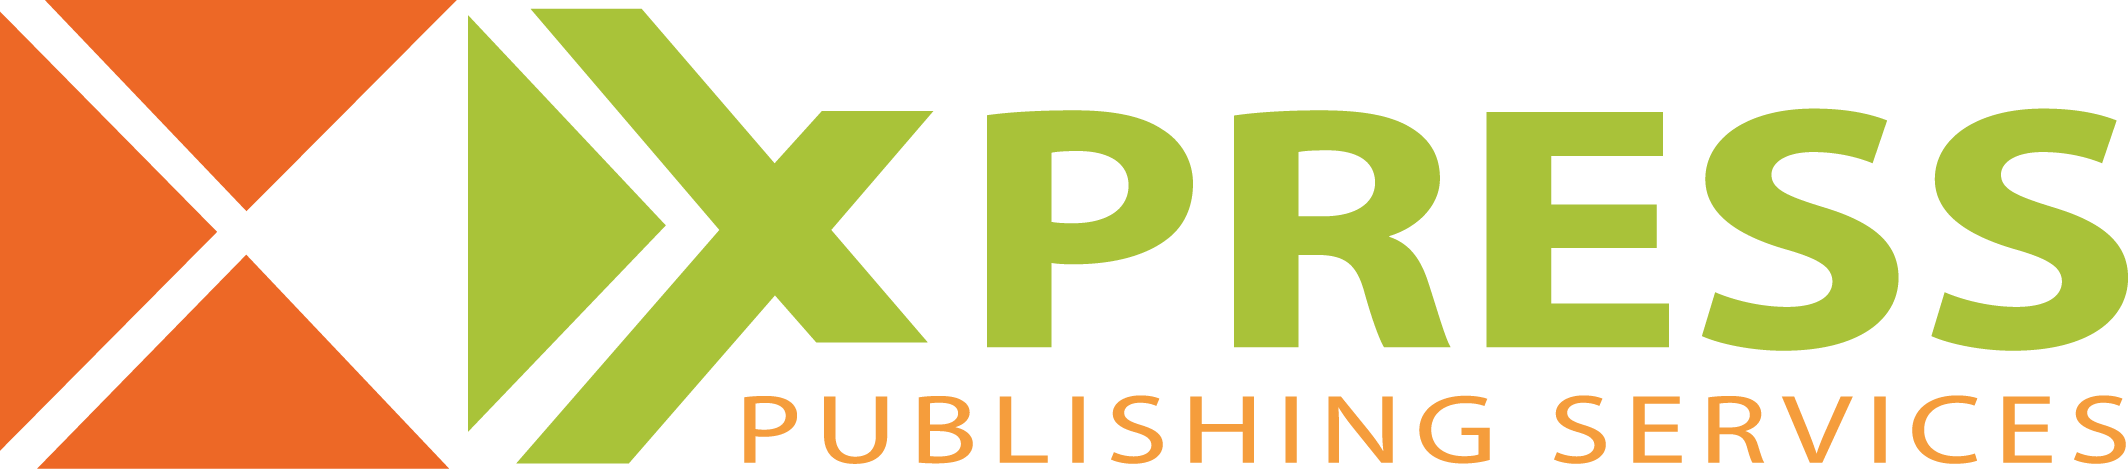 Xpress Publishing Services provides a full range of typesetting services, such as, TeX/LaTeX format, XML coding JATS and NLM, Graphical Illustrations, Proofreading,  Digitization projects, Data Conversion, Word processing, Database sheets, epub and mobi etc….